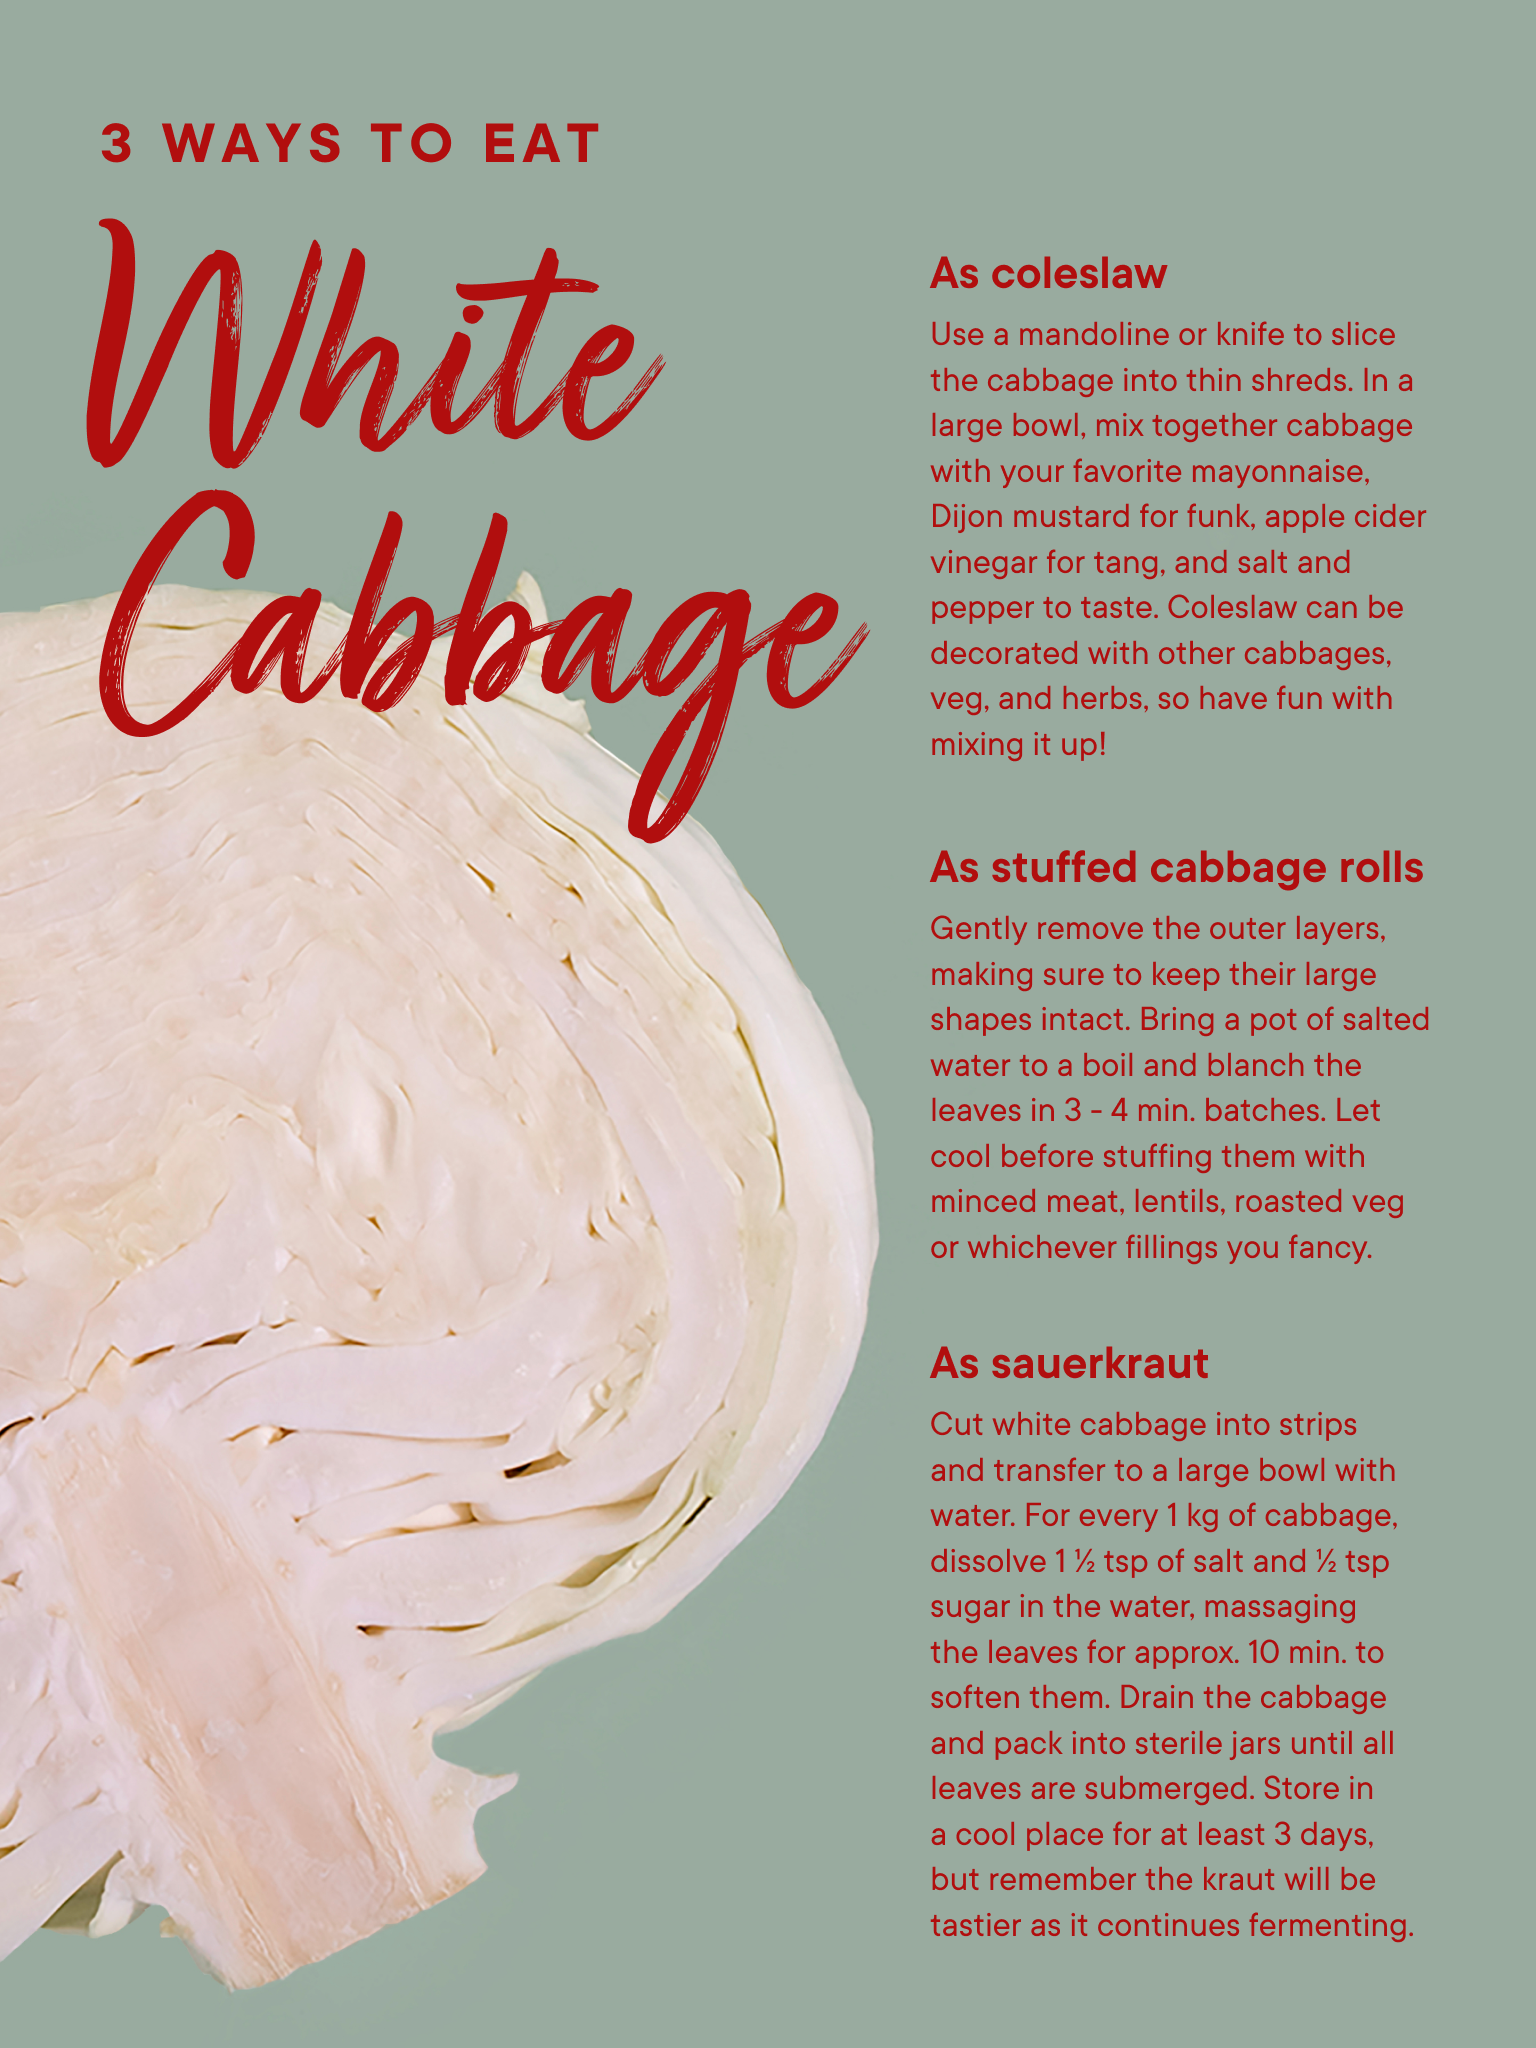 Is there such a thing as white cabbage?